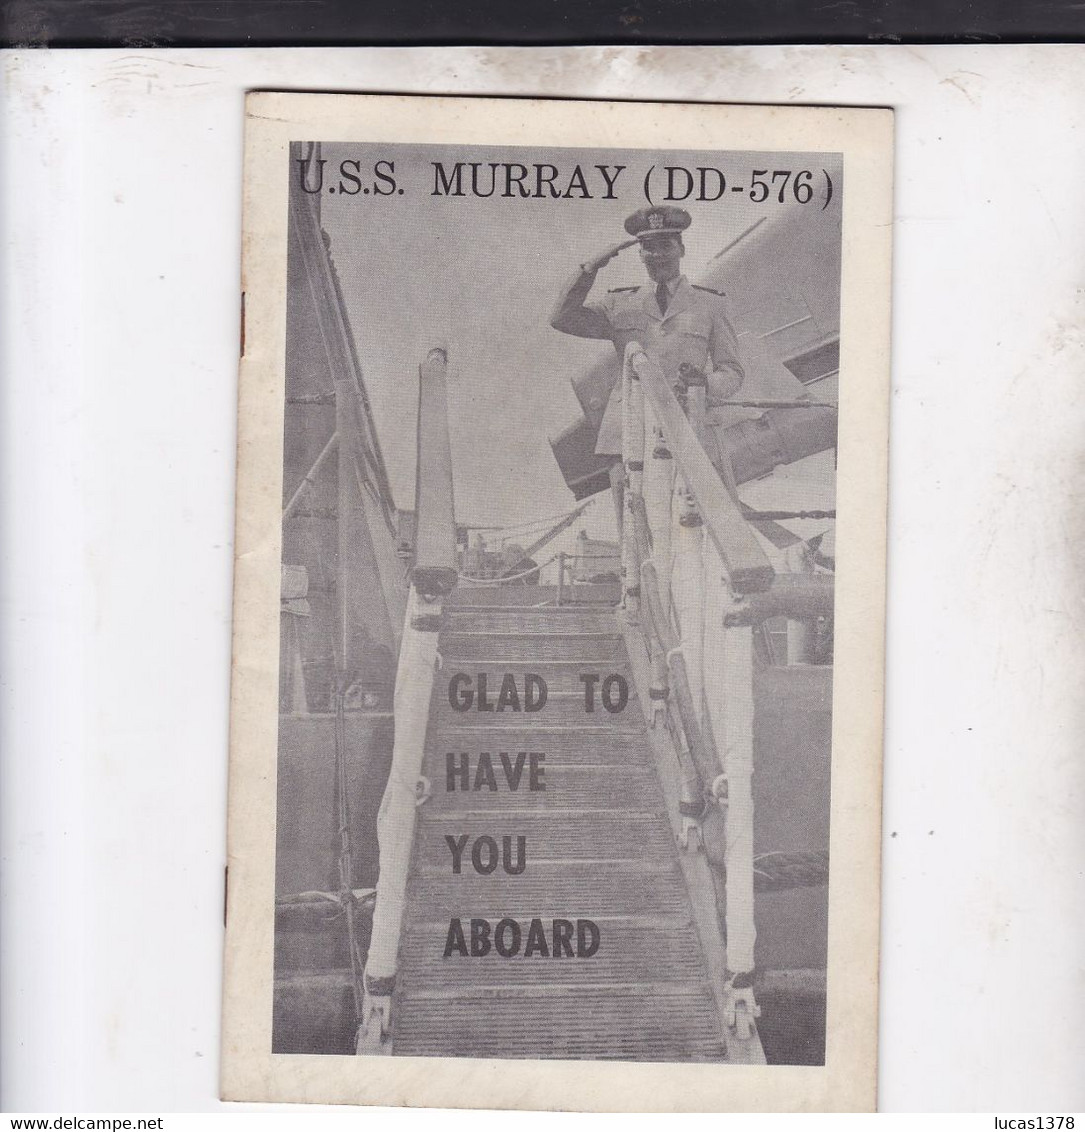 USS MURRAY / DD 576 / GLAD TO HAVE YOU ABOARD / LIVRET DE BORD 8 PAGES / RARE - US-Force